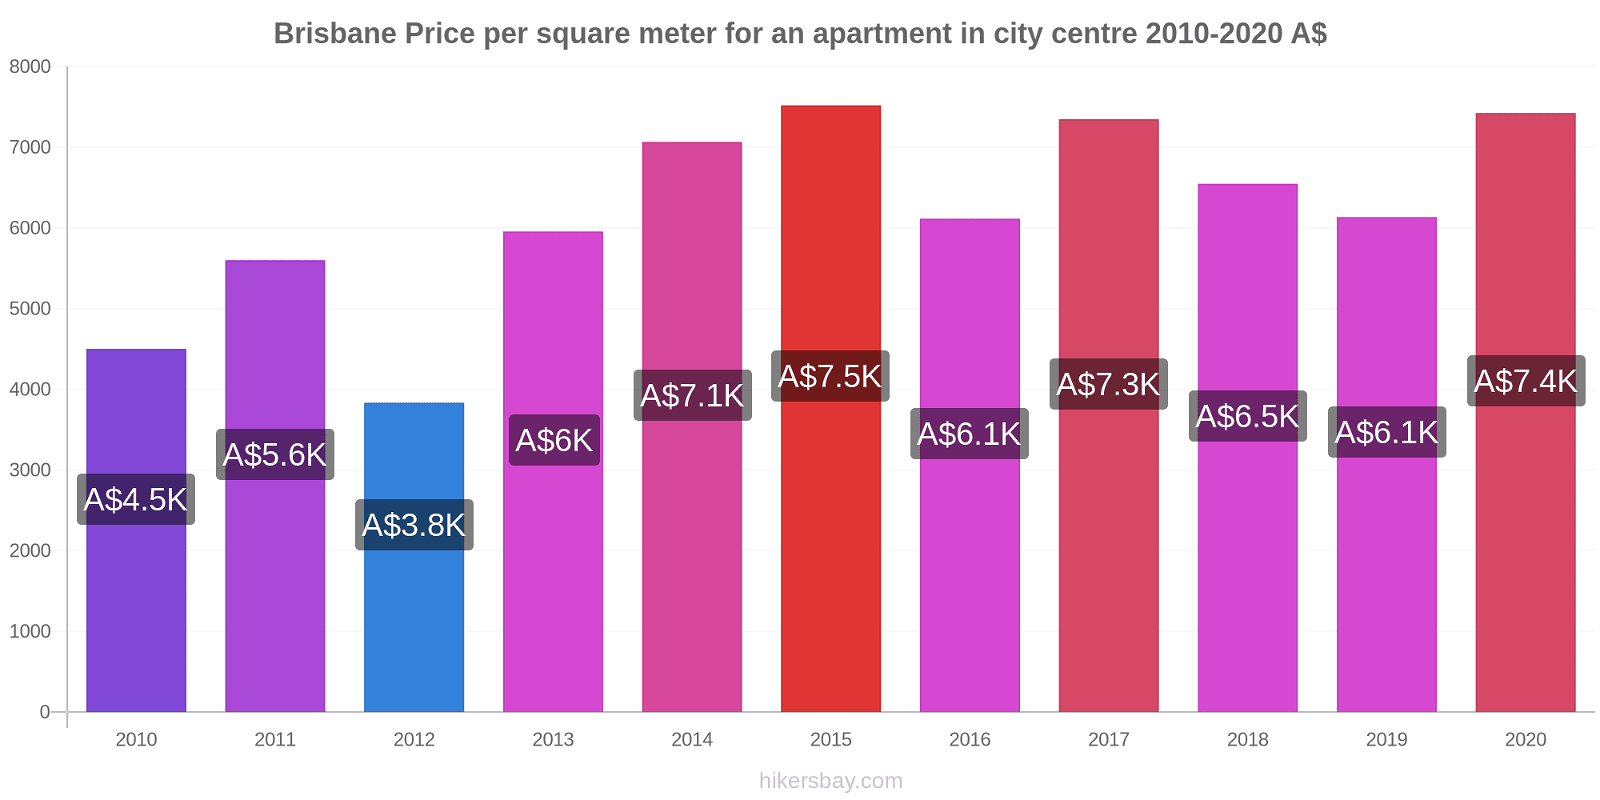 Brisbane price changes Price per square meter for an apartment in city centre hikersbay.com